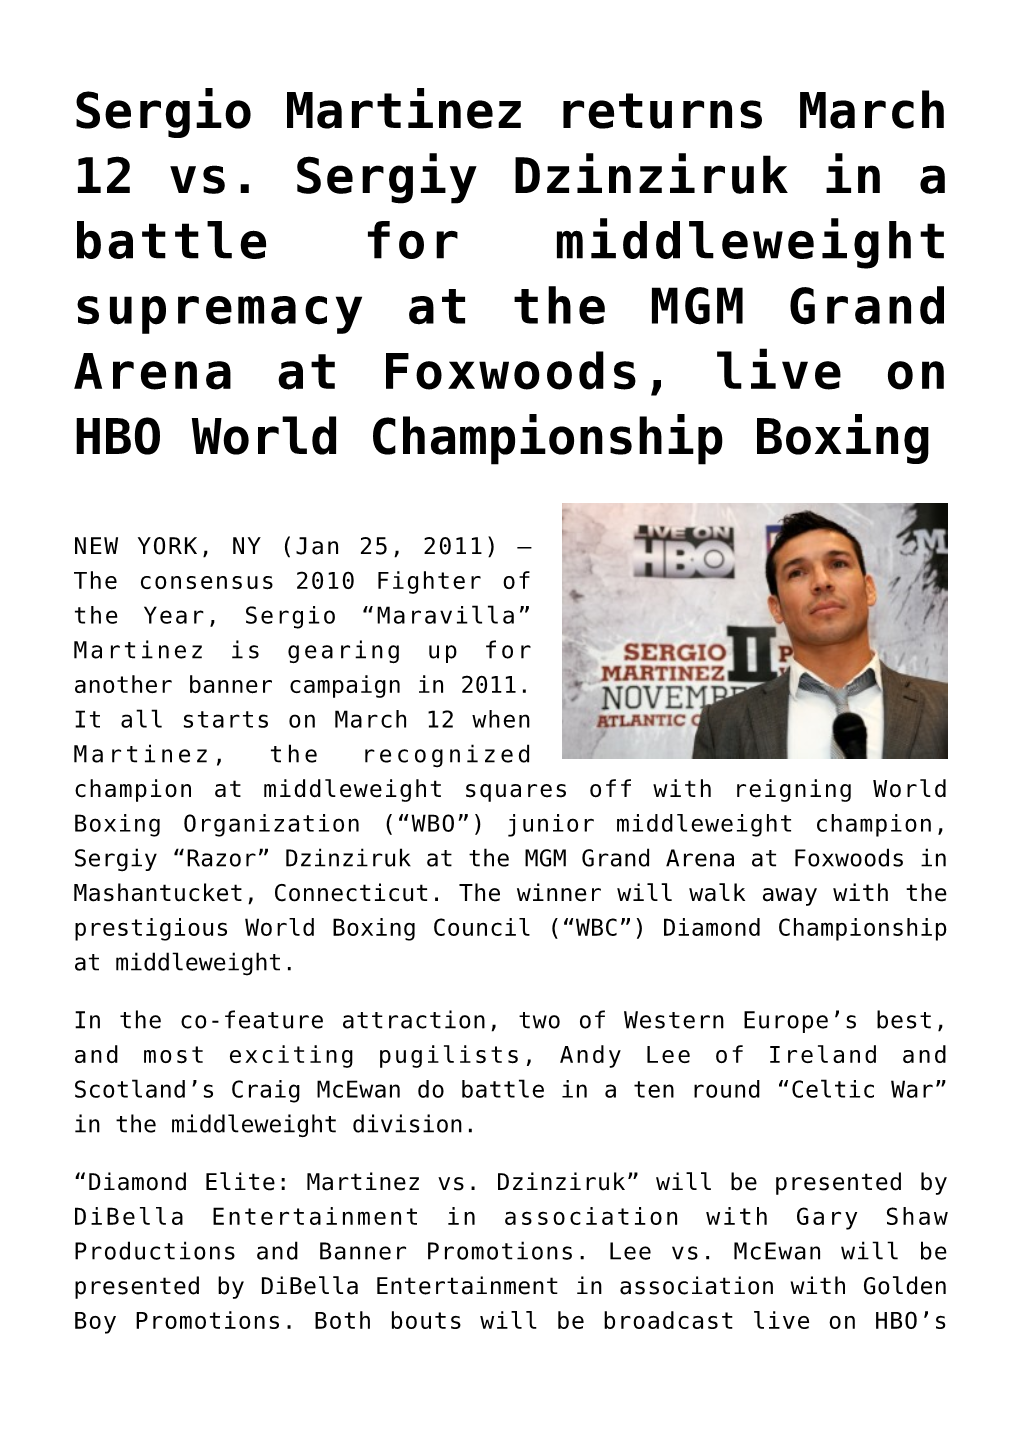 Sergio Martinez Returns March 12 Vs. Sergiy Dzinziruk in a Battle for Middleweight Supremacy at the MGM Grand Arena at Foxwoods, Live on HBO World Championship Boxing